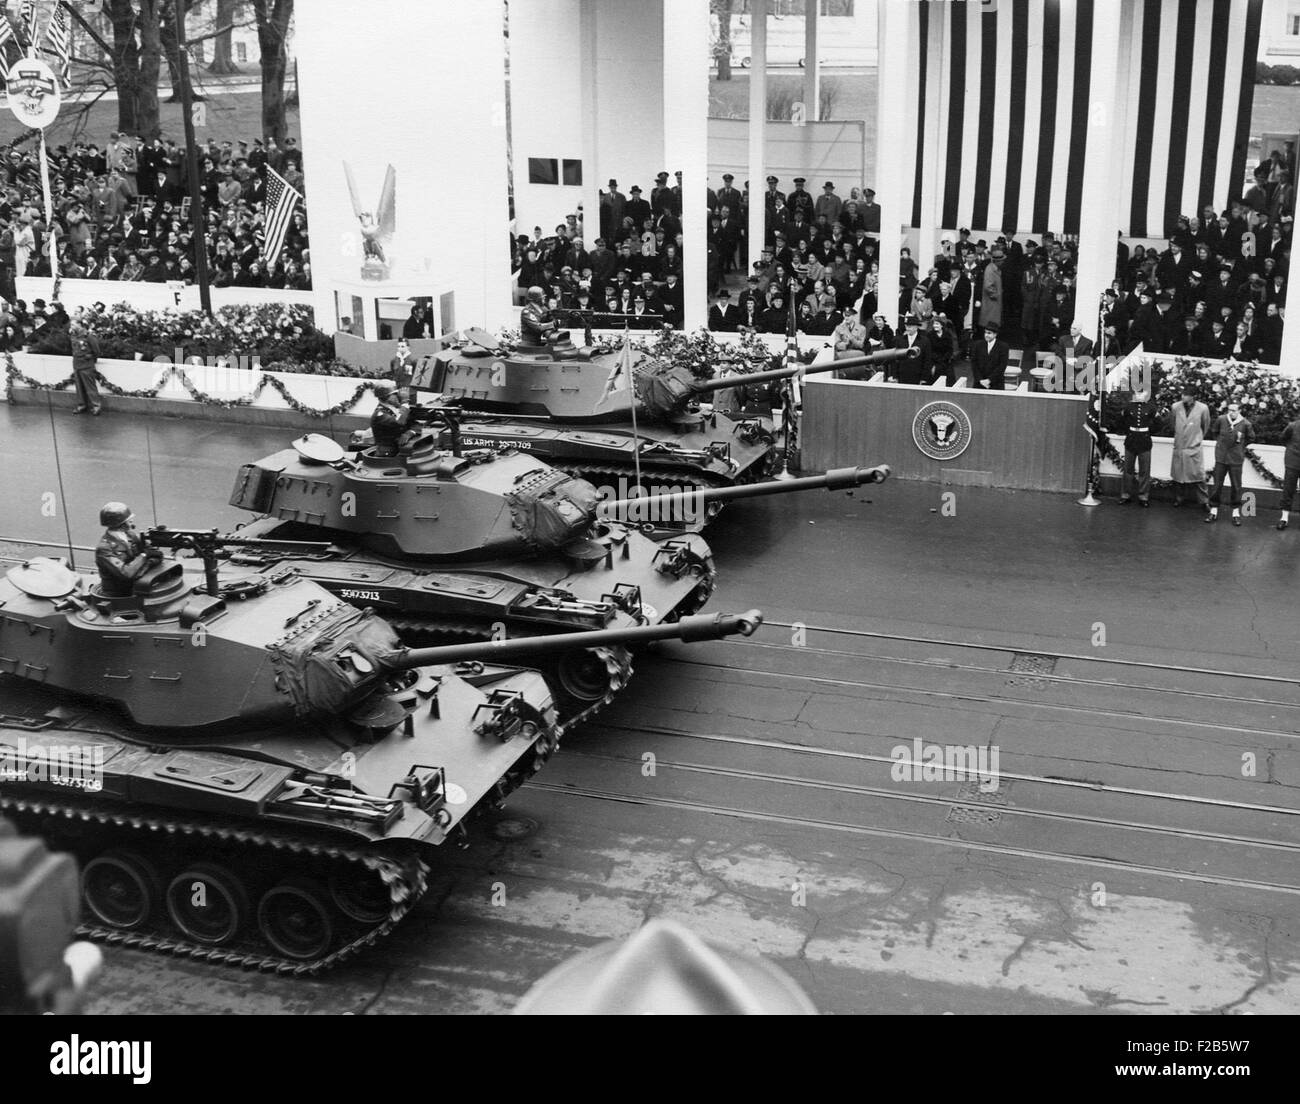 U.S. Army tanks pass Eisenhower's reviewing stand during the Inaugural parade. Jan 21, 1957. - (BSLOC 2014 16 38) Stock Photo